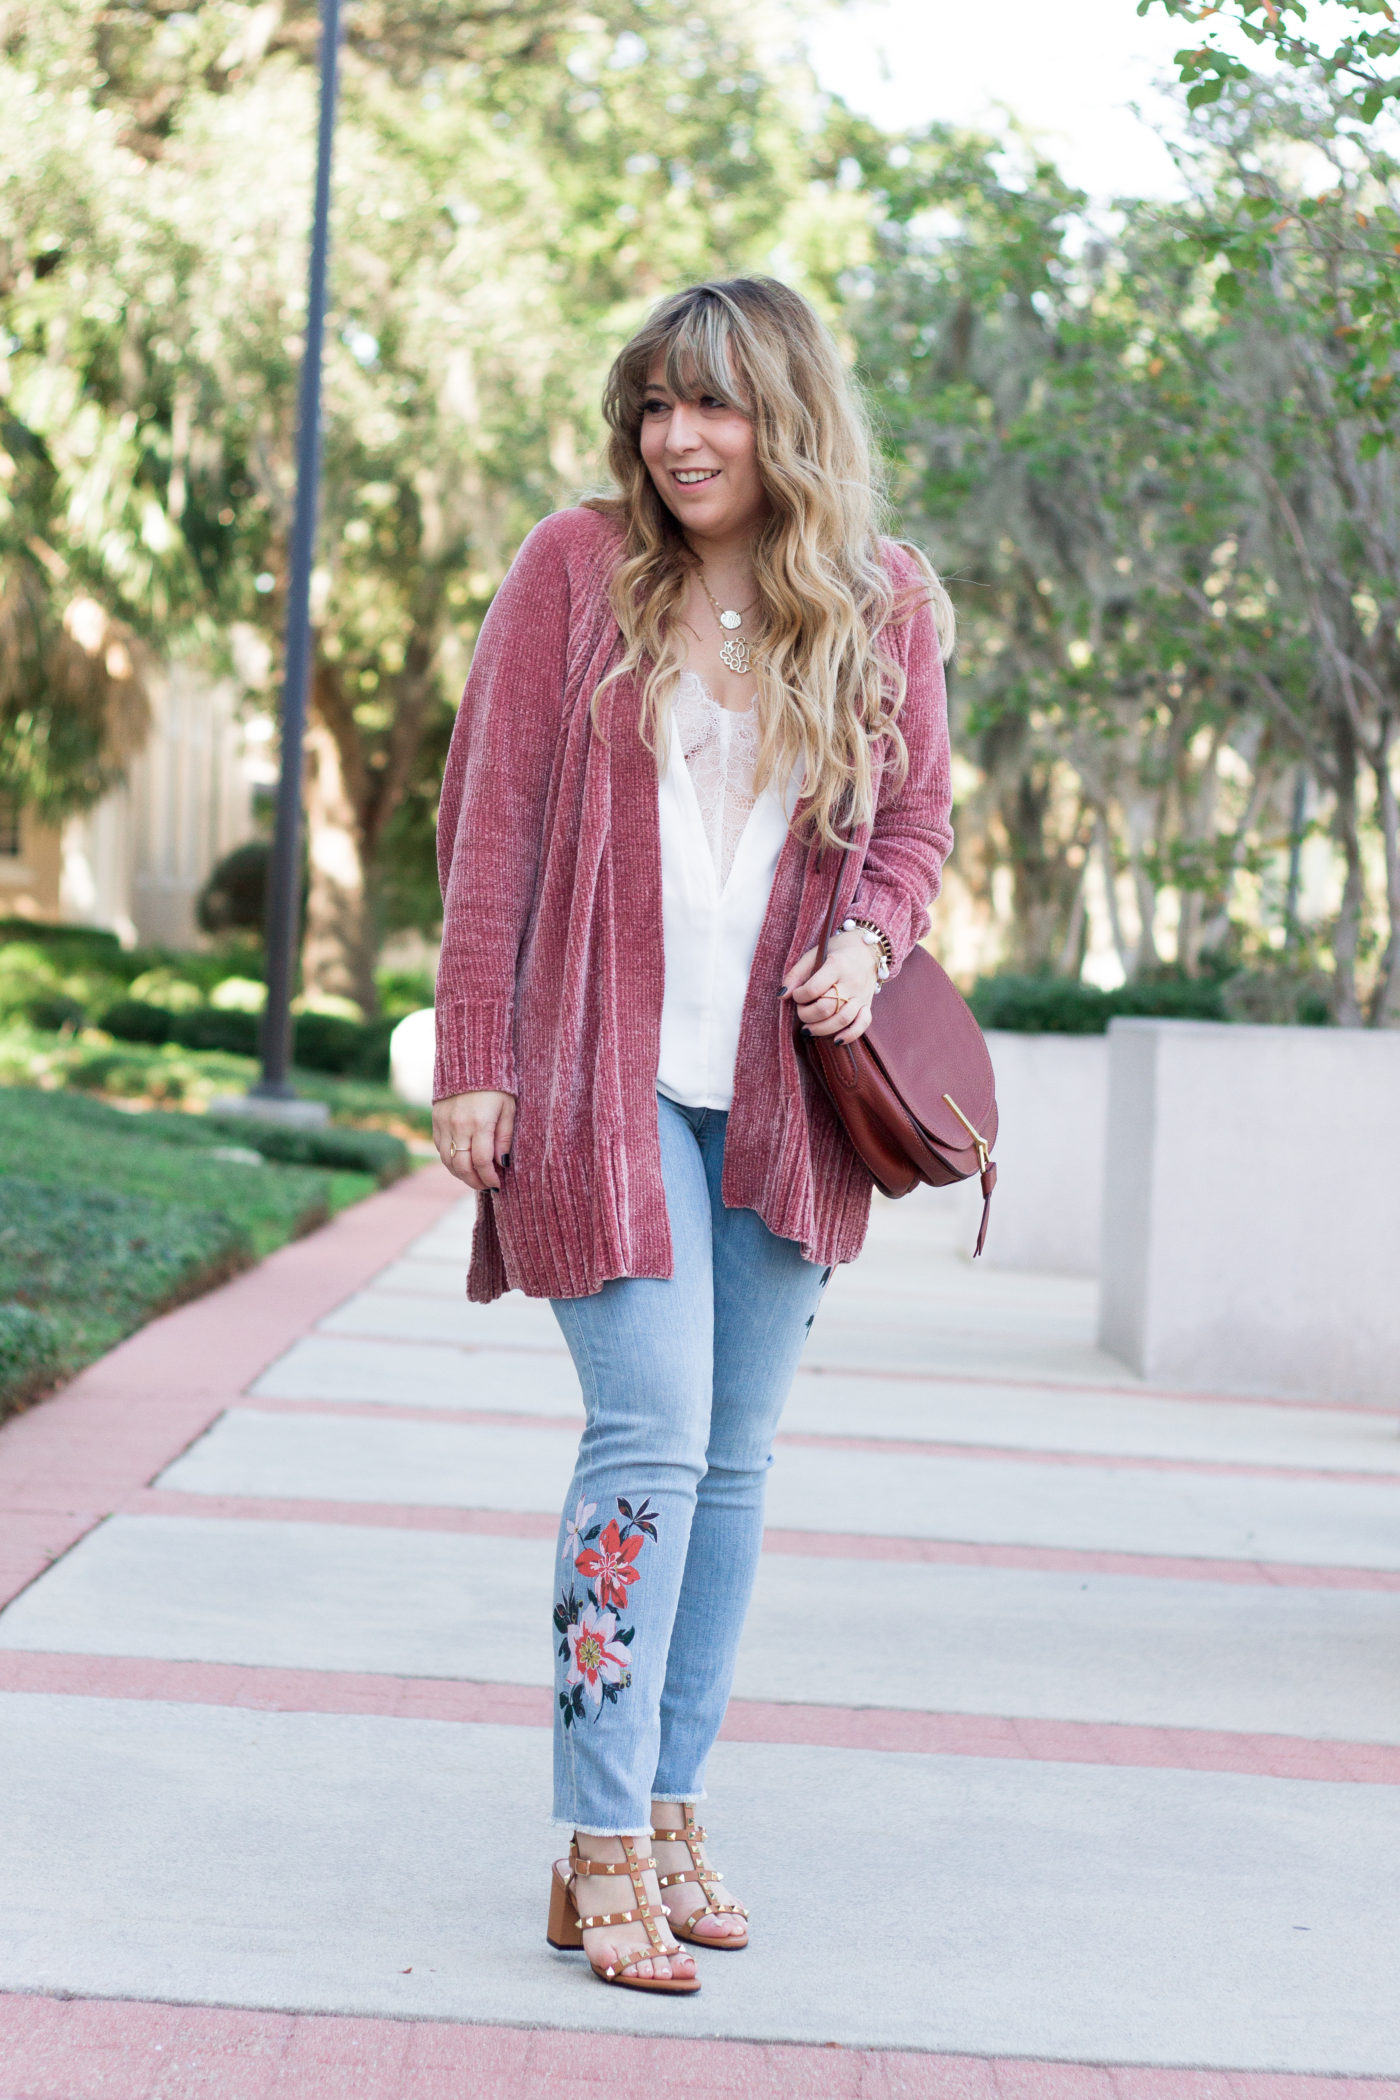 jeans and cardigan outfit